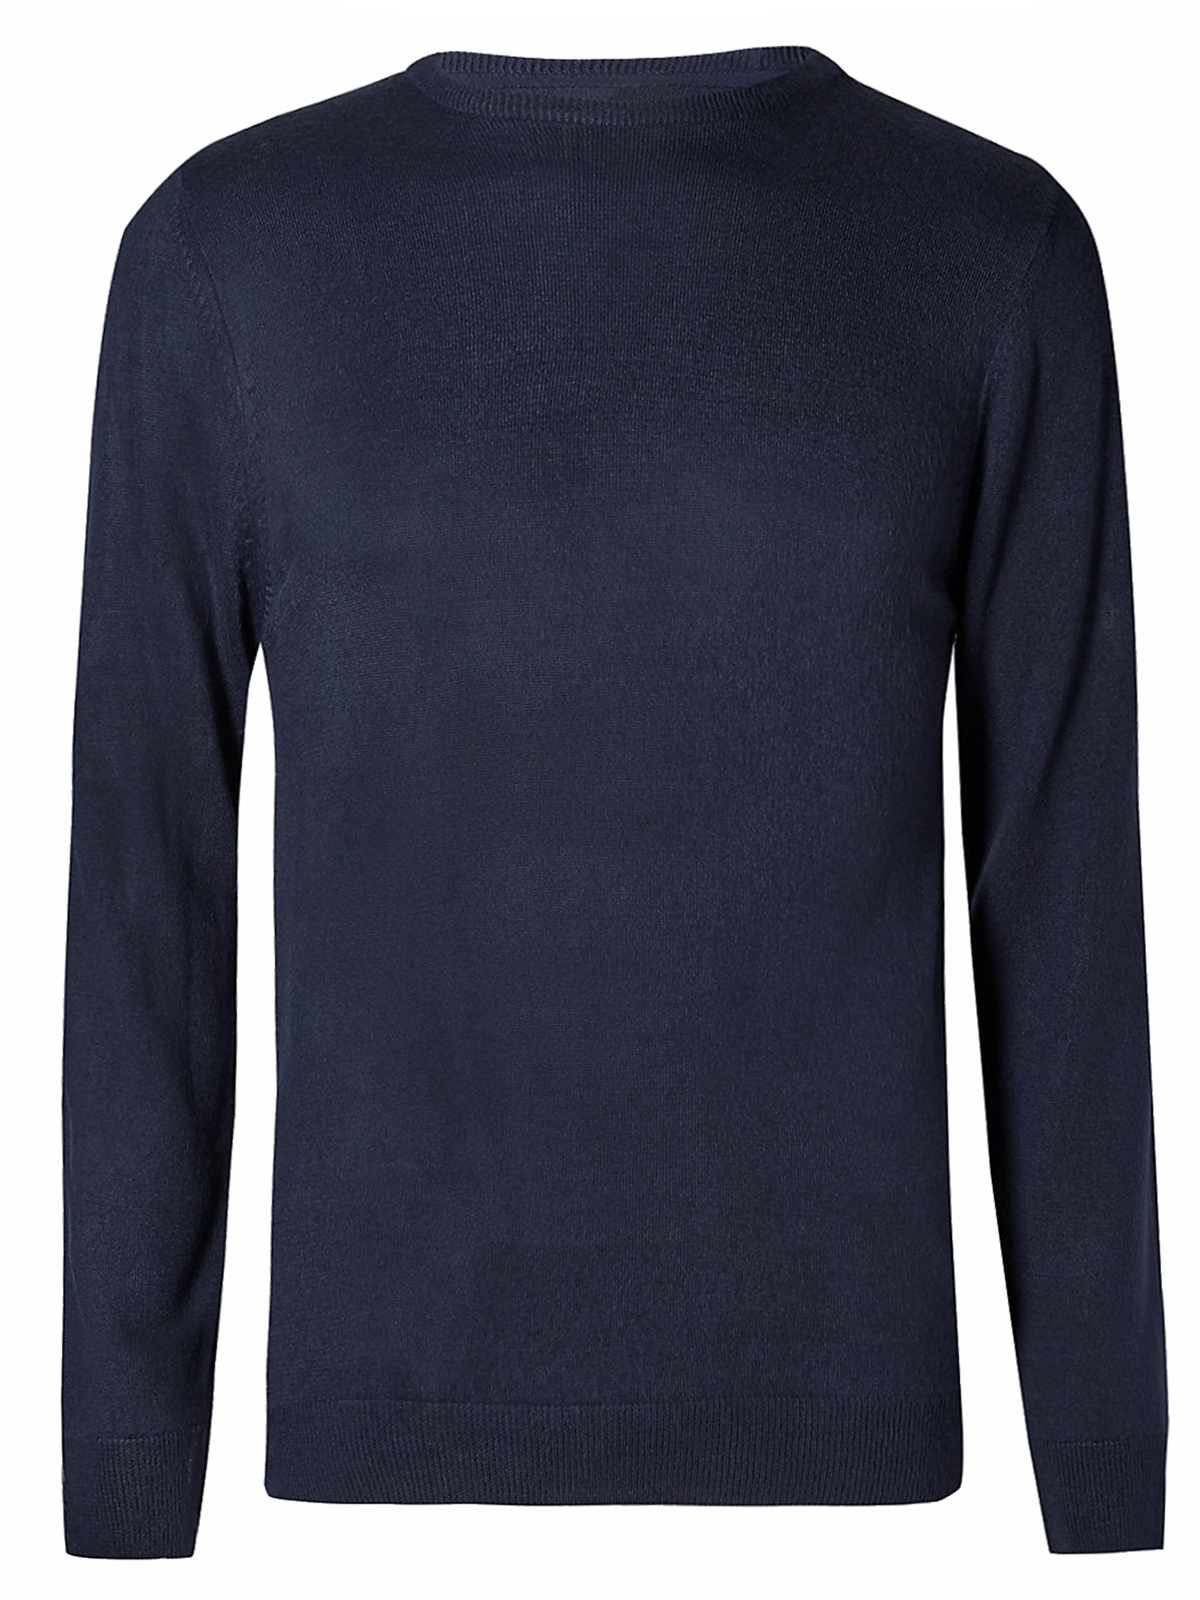 Marks and Spencer - - M&5 Mens NAVY Crew Neck Jumper - Size Small to to ...